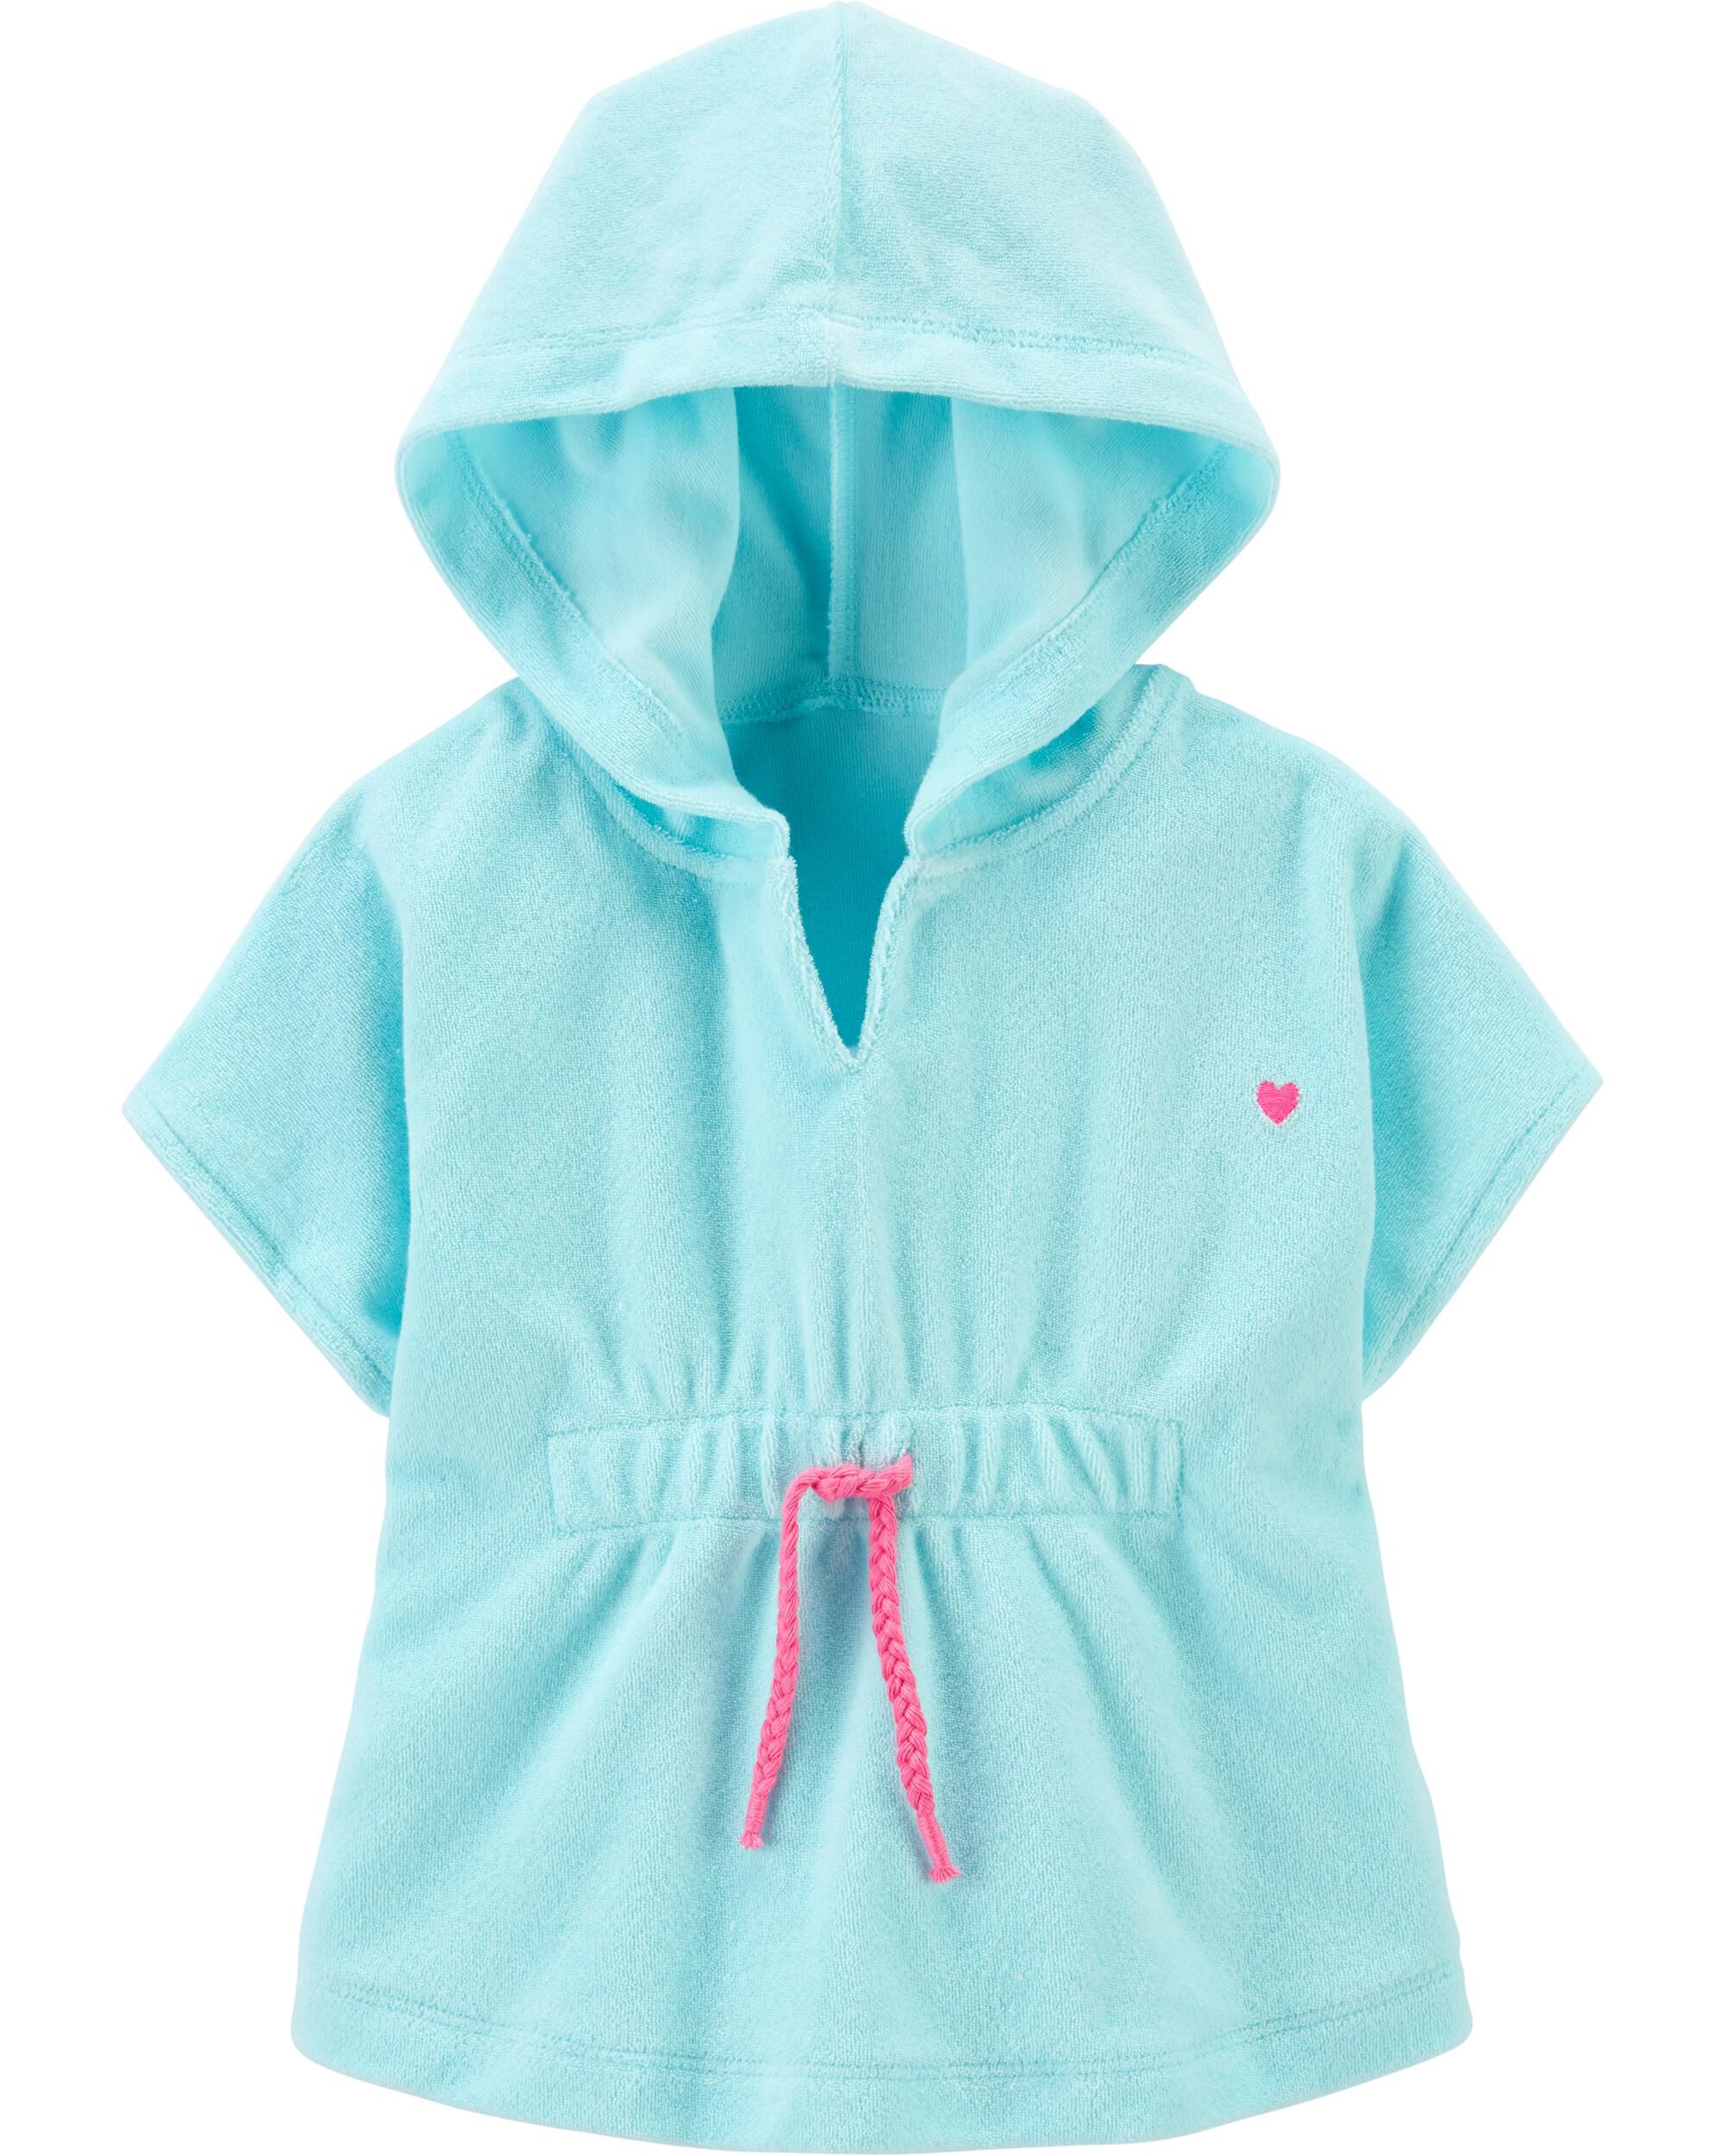 Carters Girls Swim Cover-up